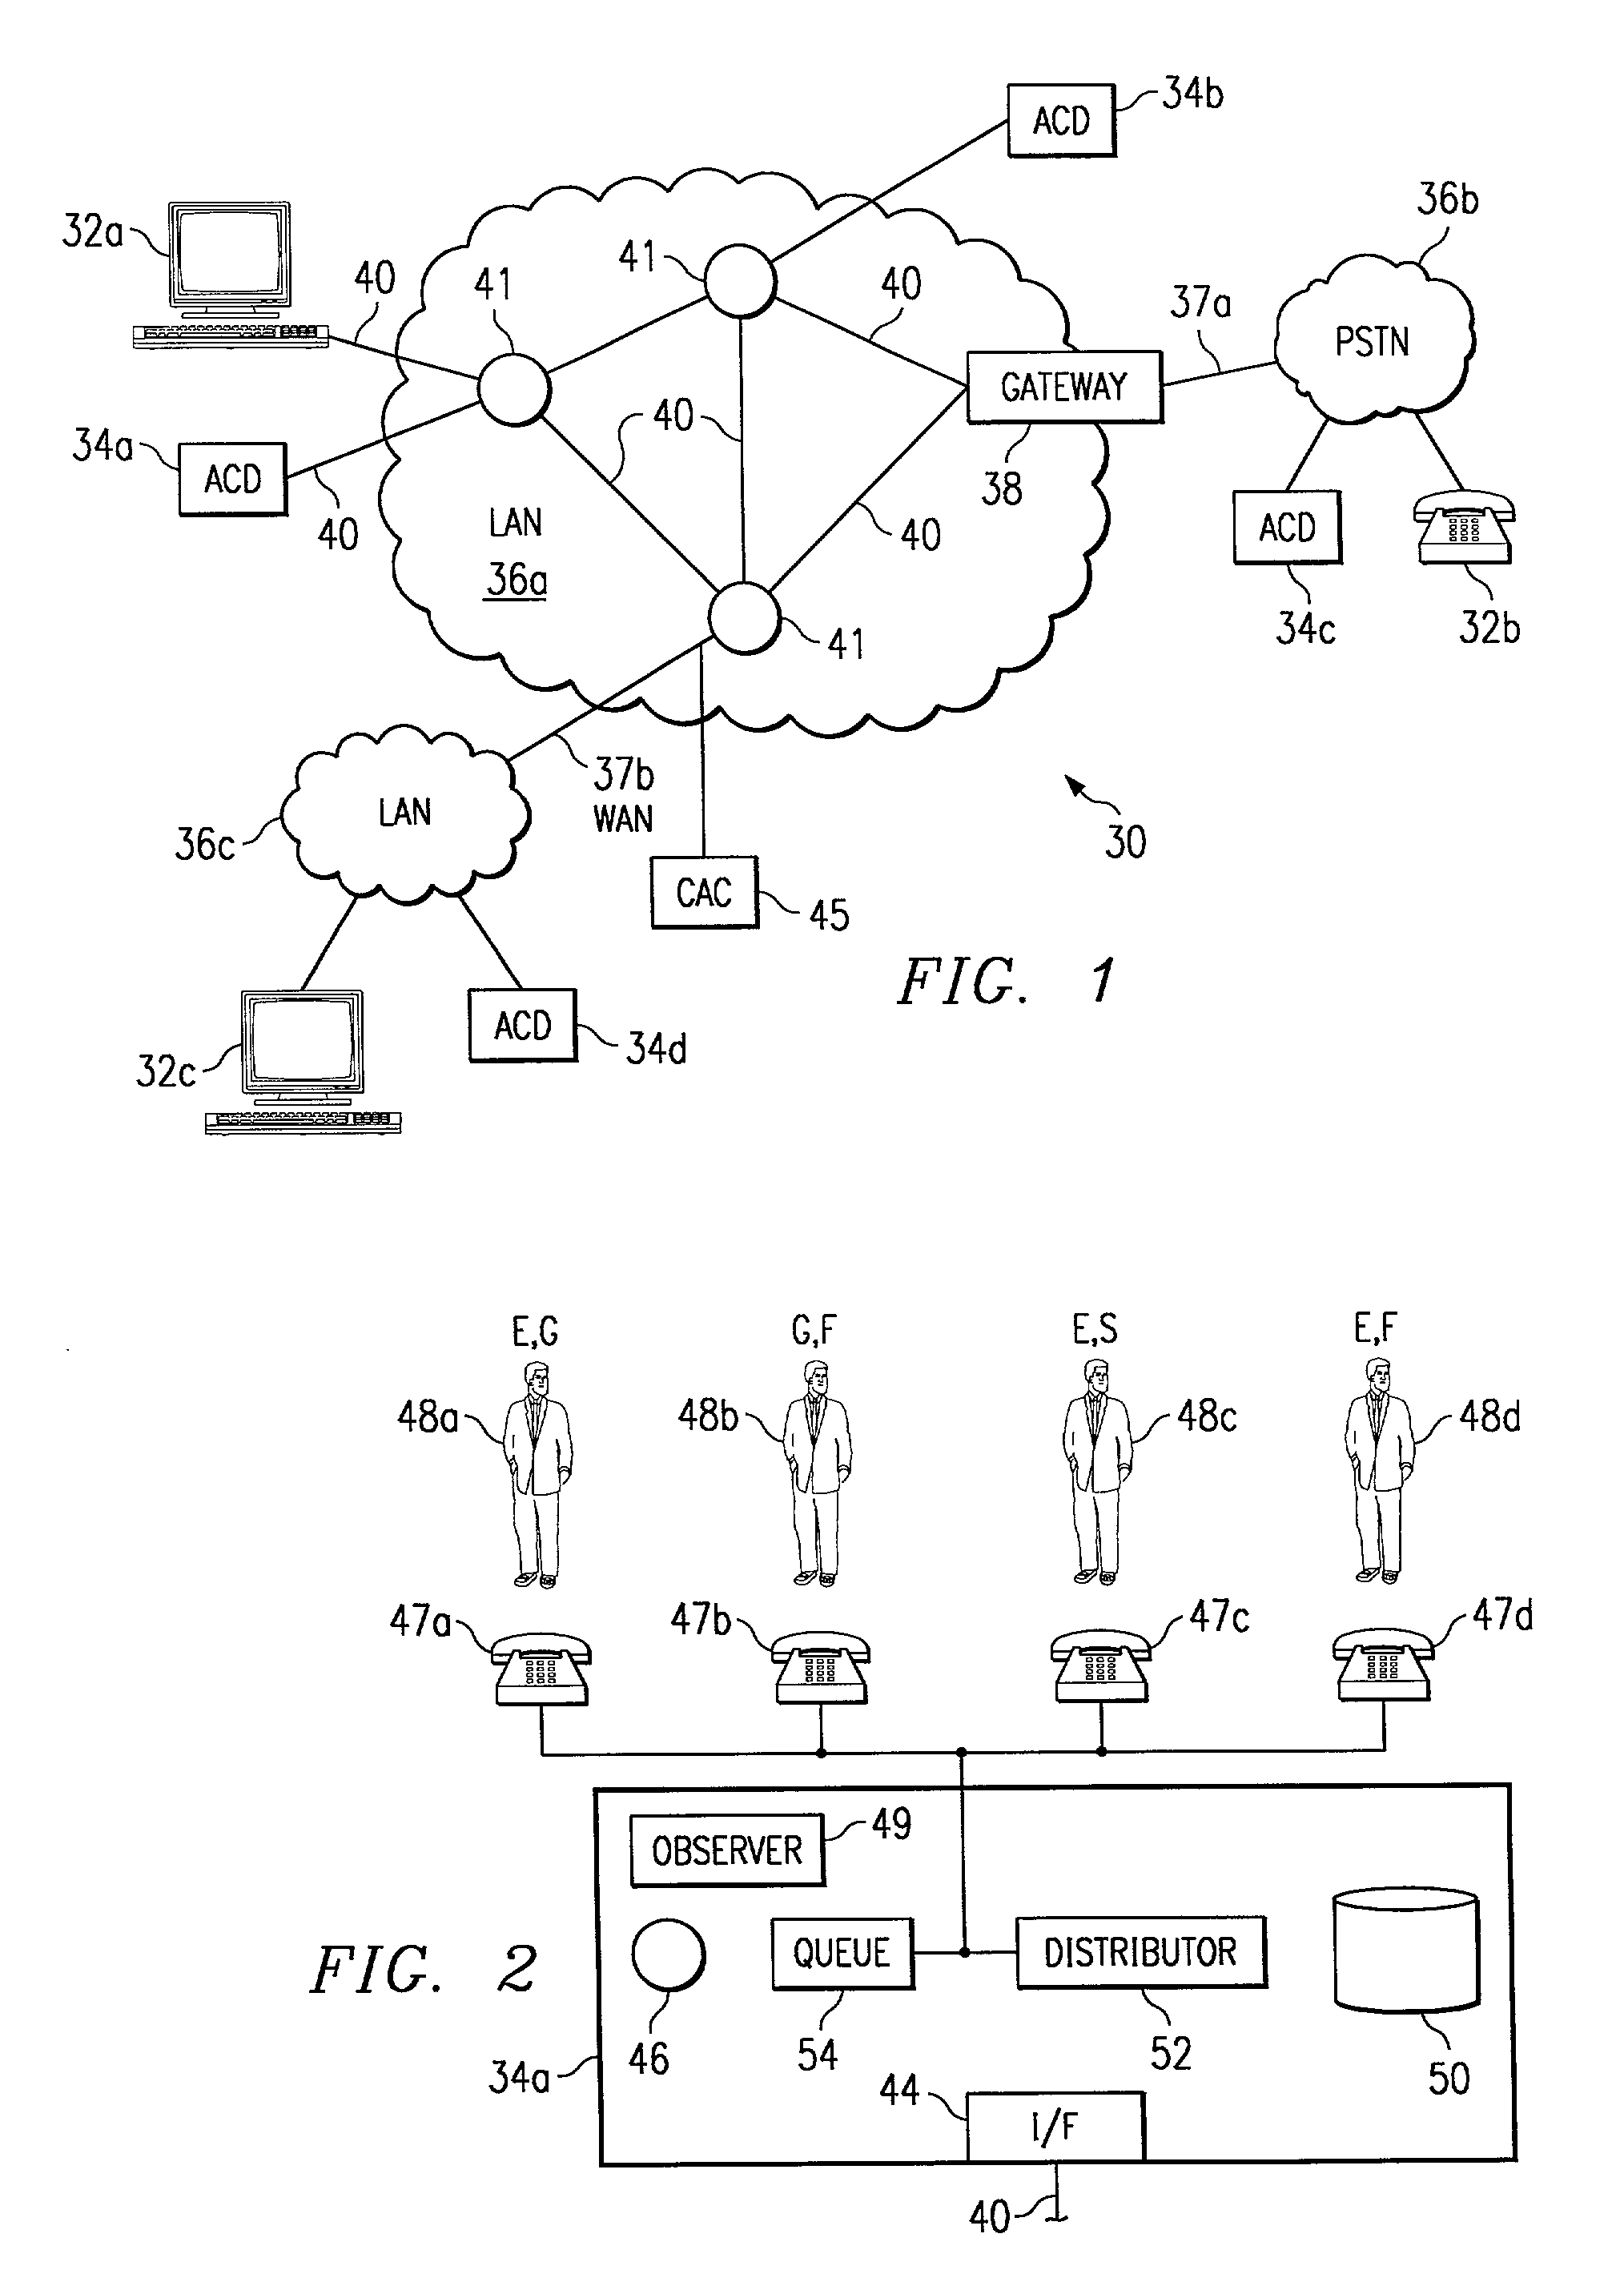 Method and system for automatic call distribution based on network resource availability and agent skills